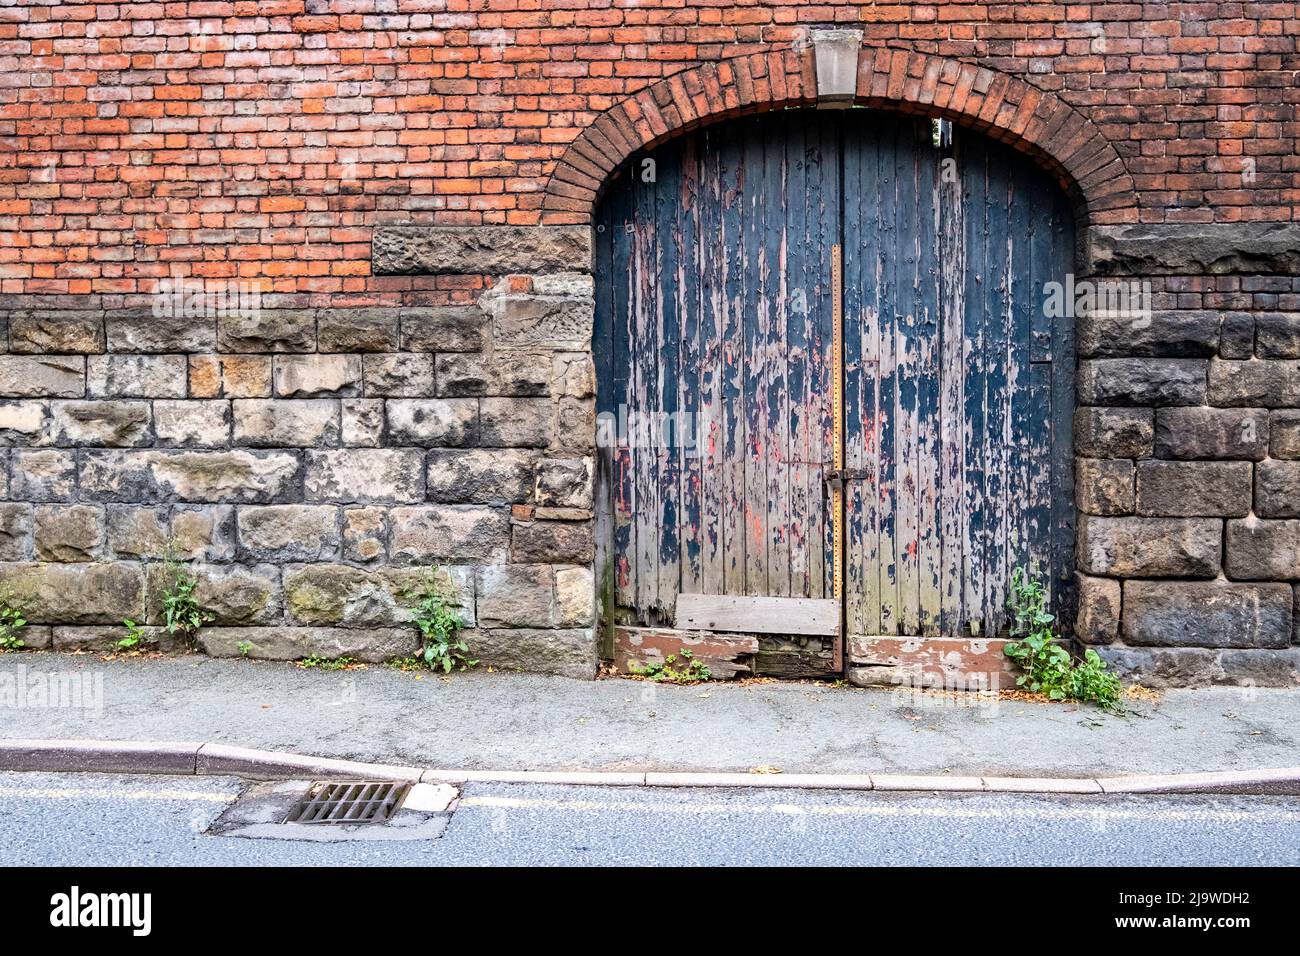 Entrance to old factory or workshop UK Stock Photo